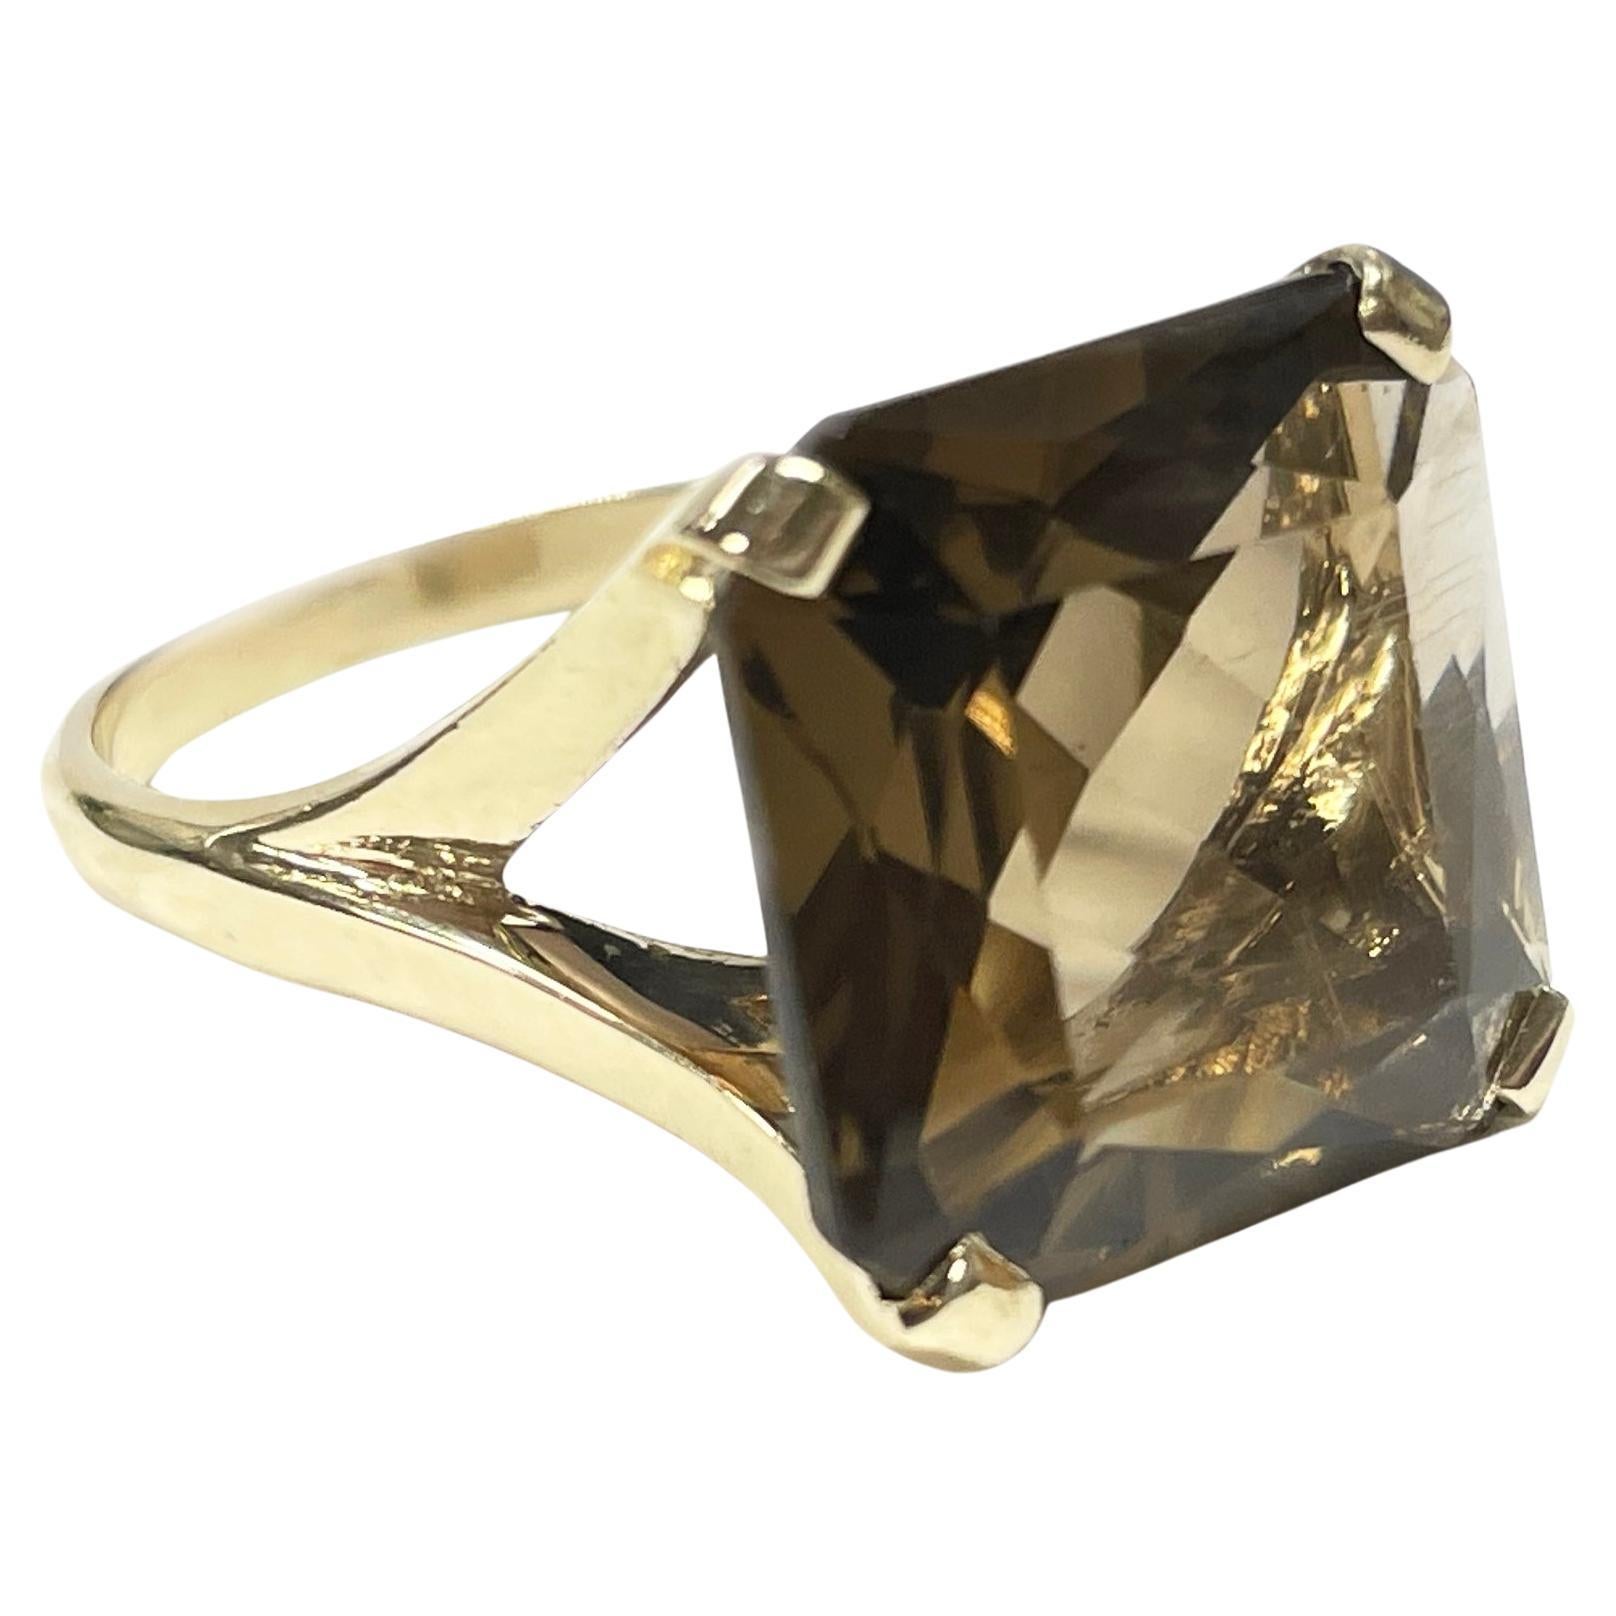 10 Karat Yellow Gold Smoky Quartz Ring. The ring features a 14mm square bezel-set step-cut Smoky Quartz. The split band tapers and has a smooth shiny finish. Stamped on the inside of the band is 10K SPRI, the rest of the letters are worn off. The